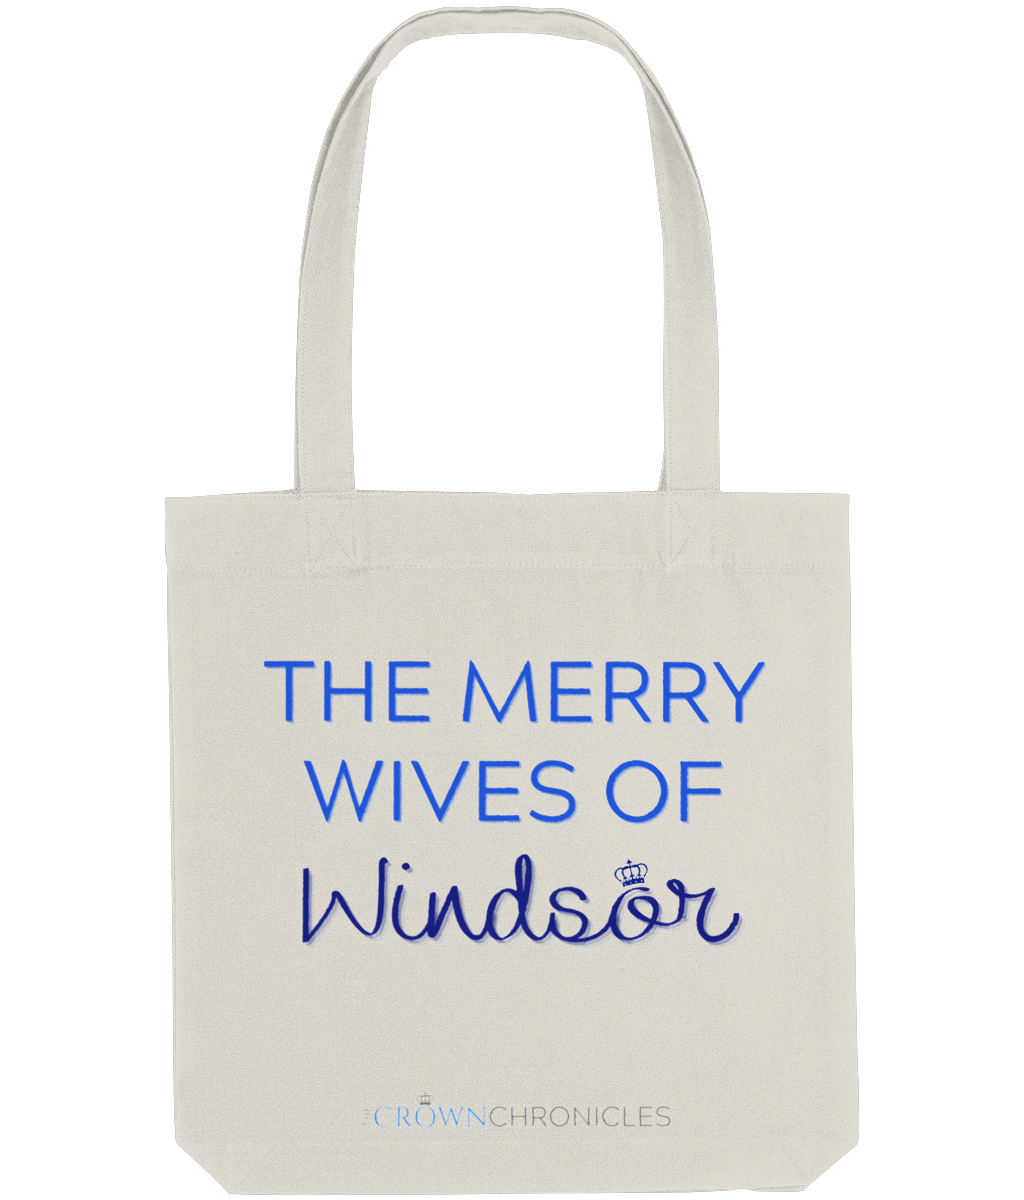 Merry Wives of Windsor tote bag